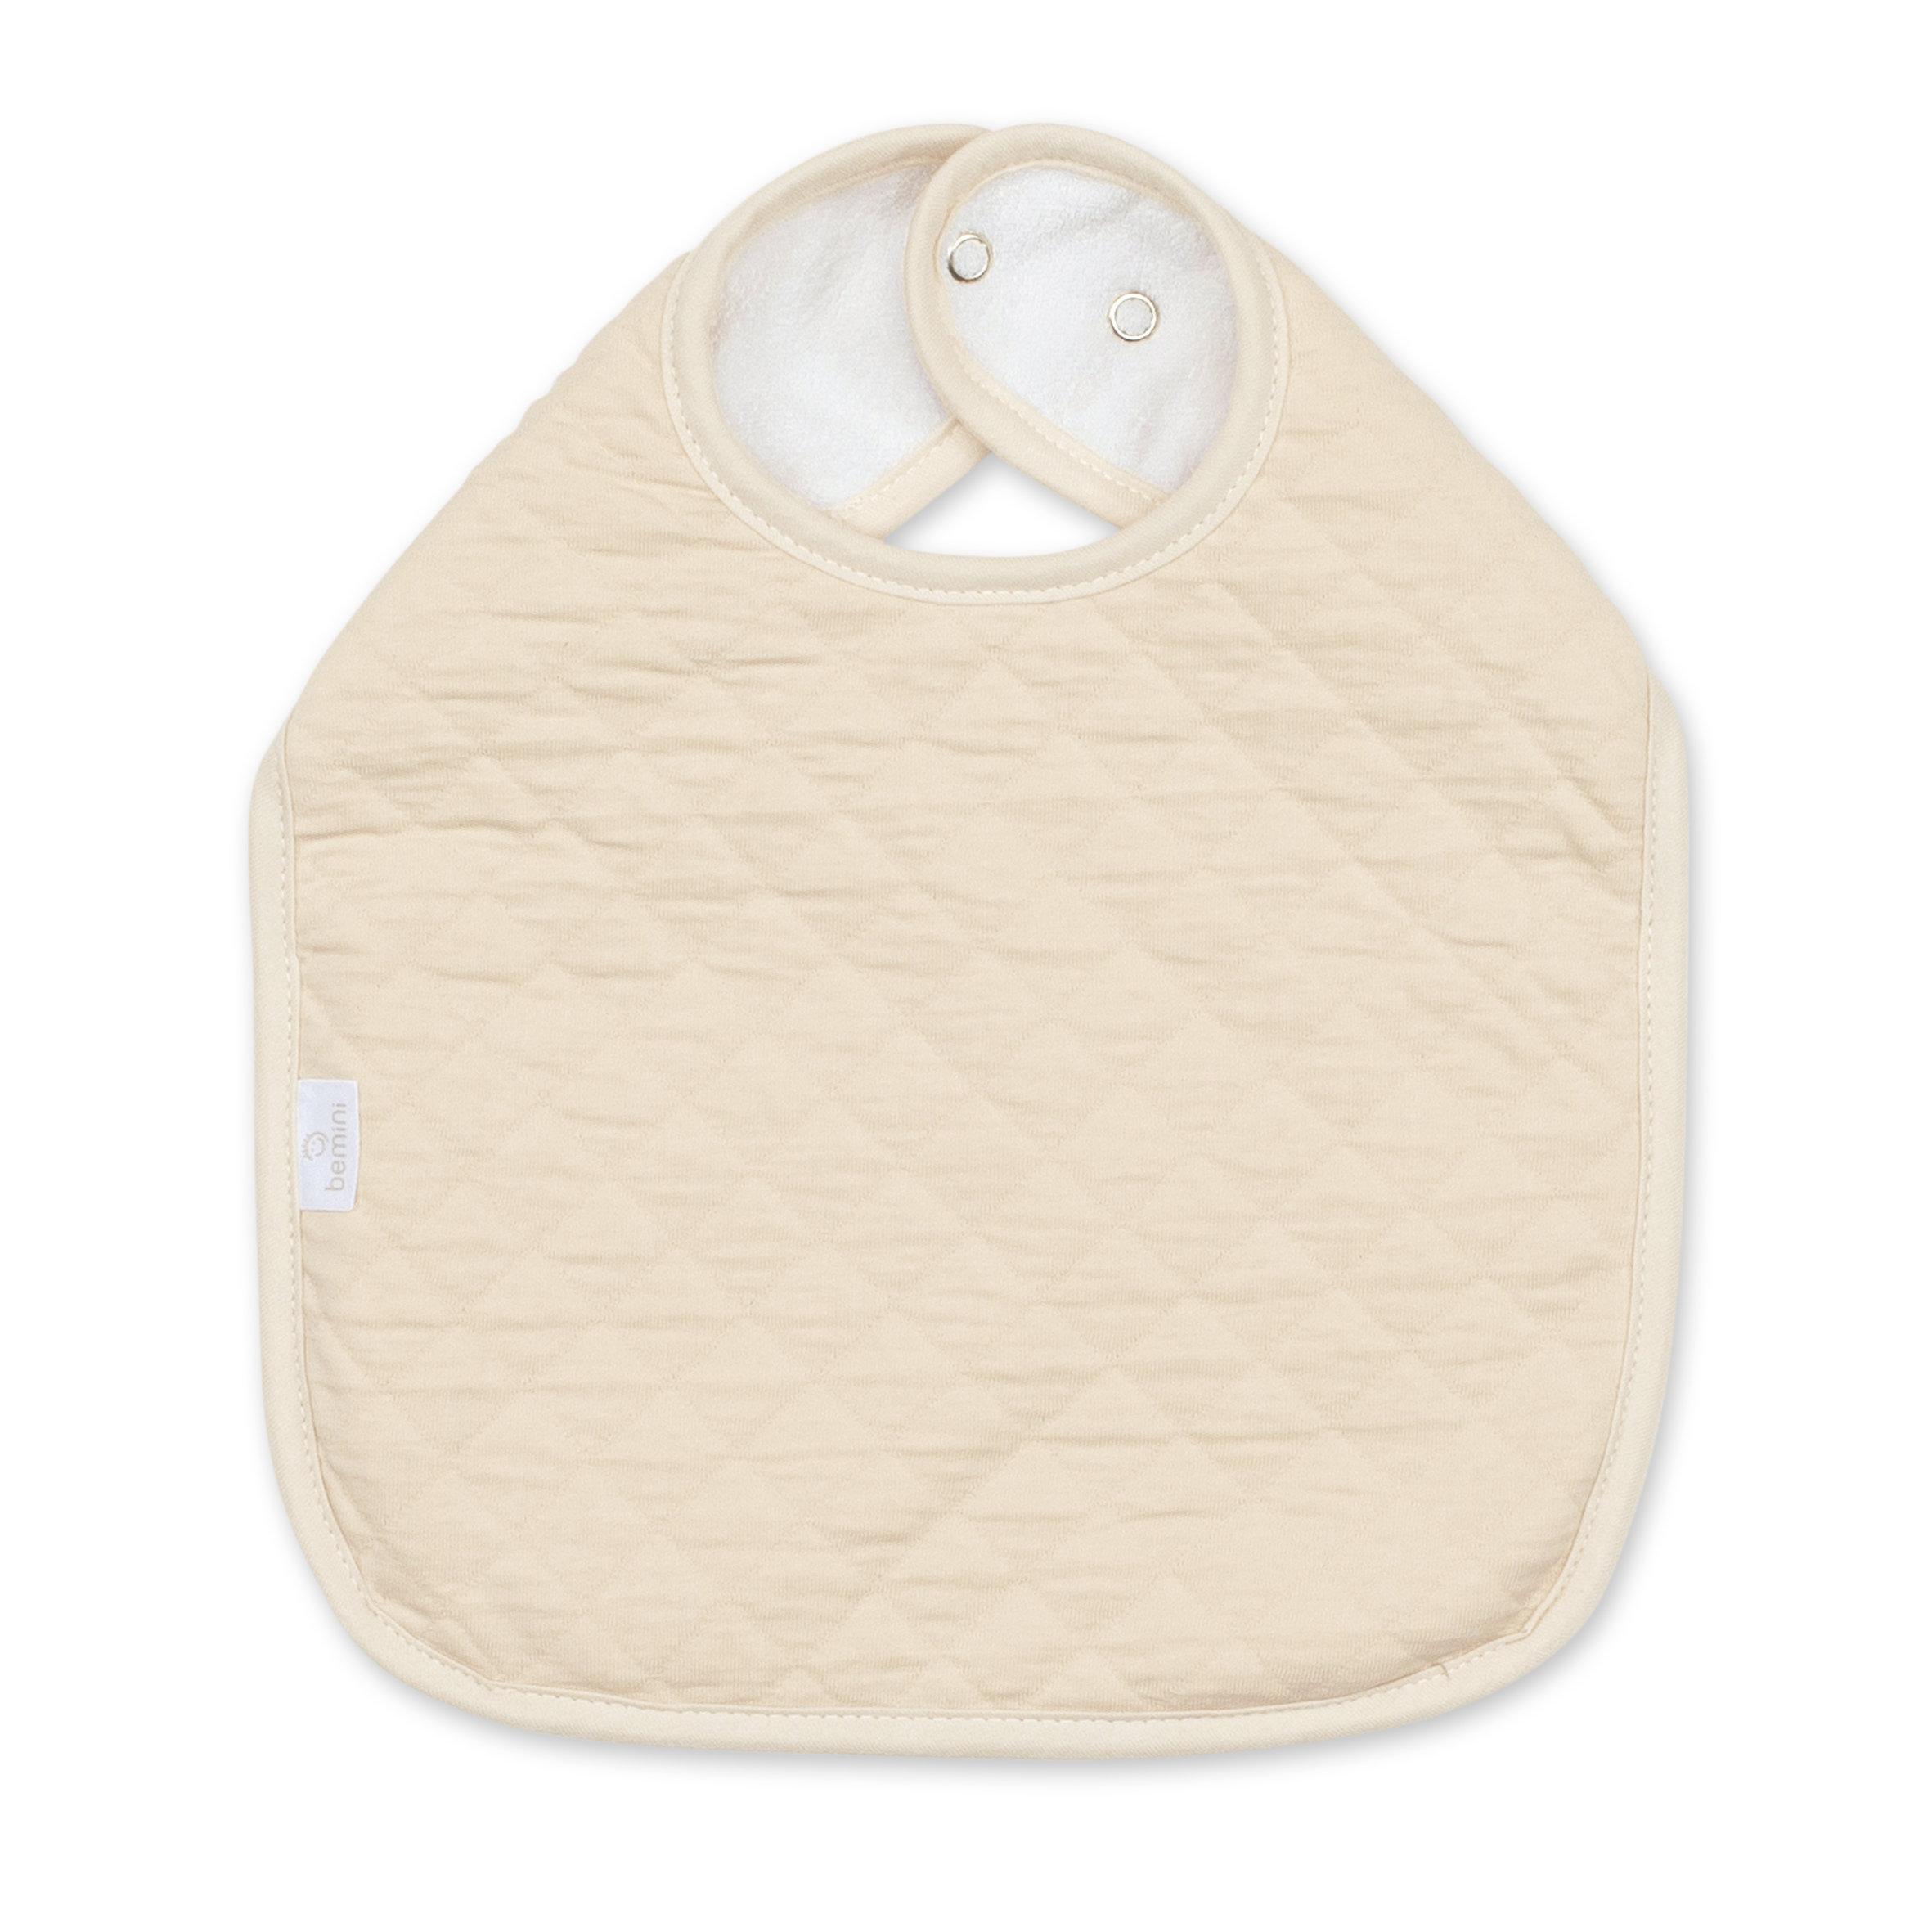 Slab waterproof Pady quilted jersey 37cm QUILT Cream